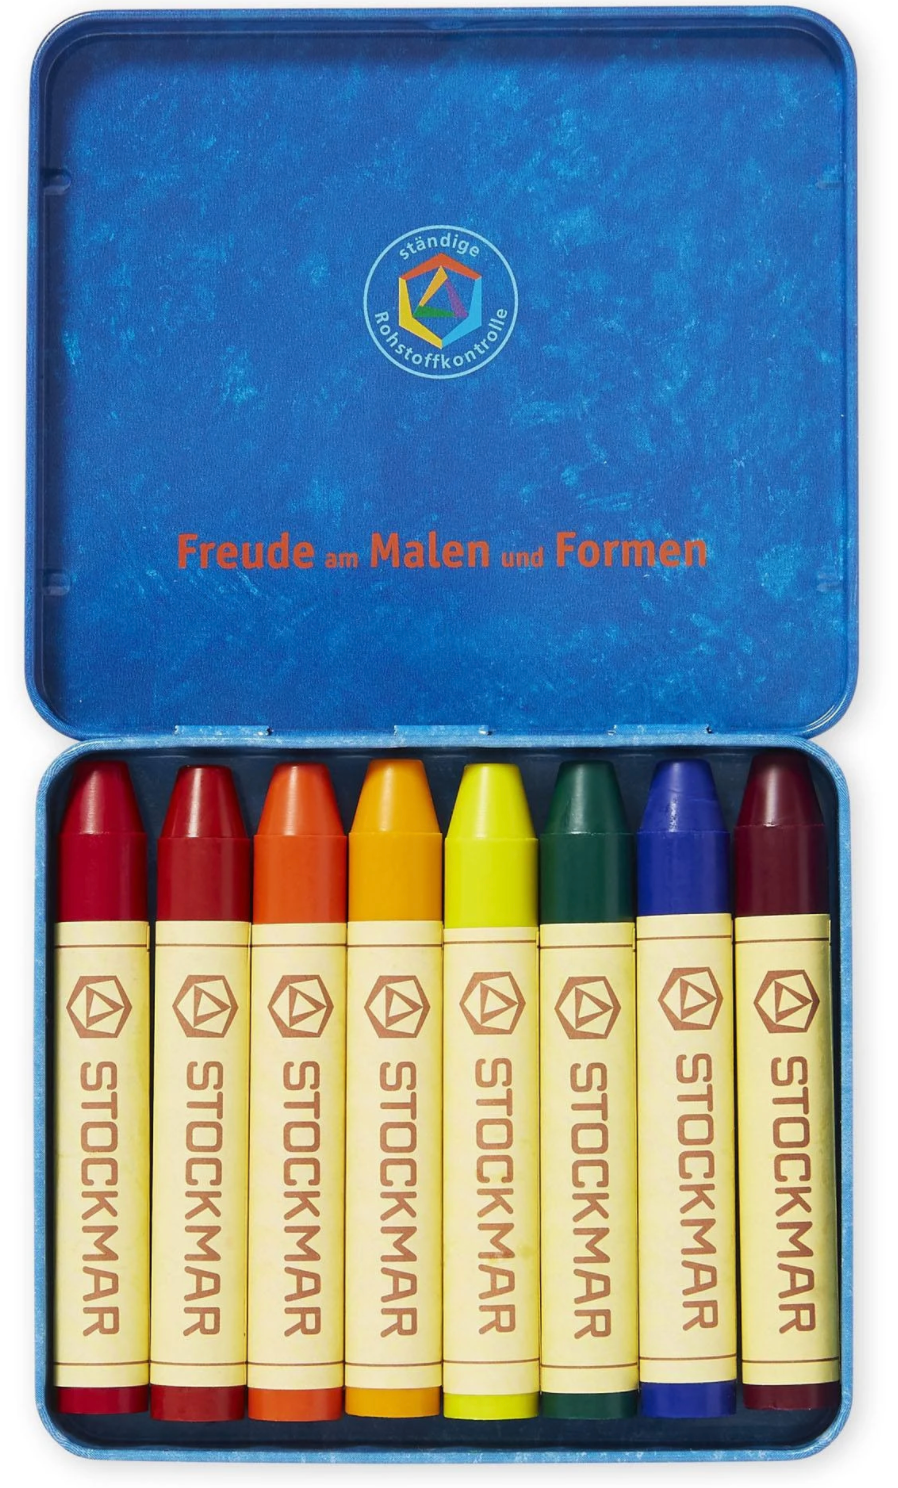 Crayons, pencils, beeswax, 8 colors